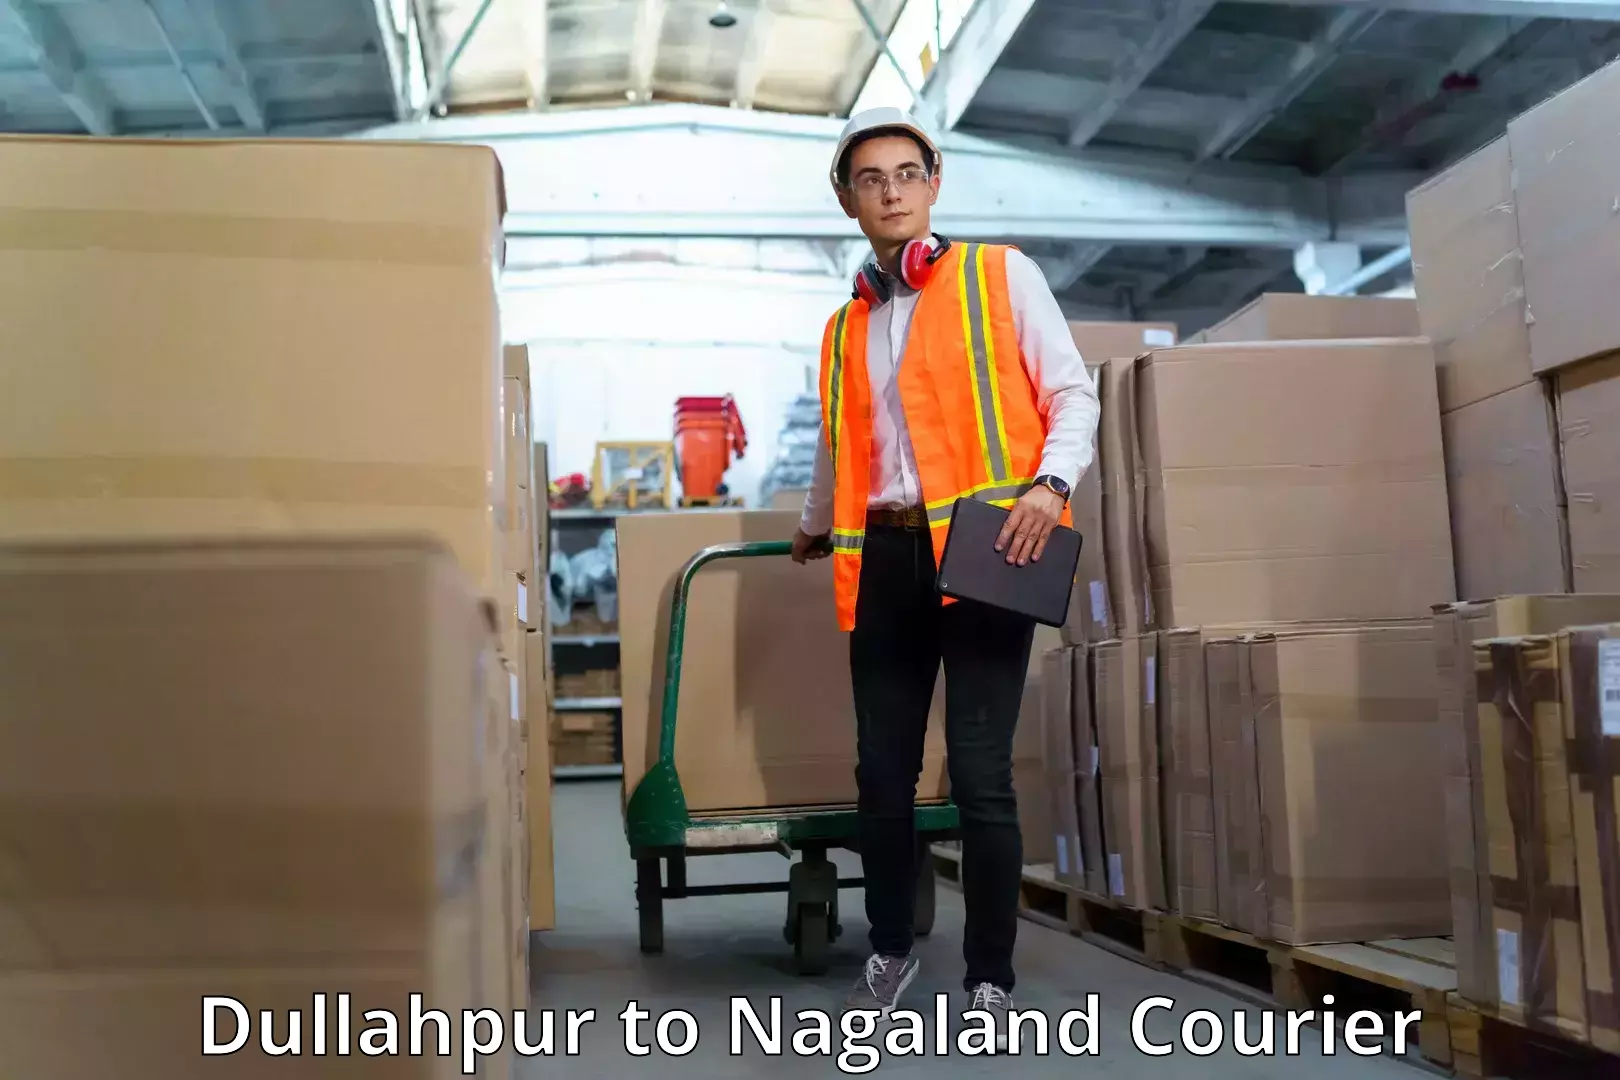 Professional courier handling Dullahpur to Nagaland